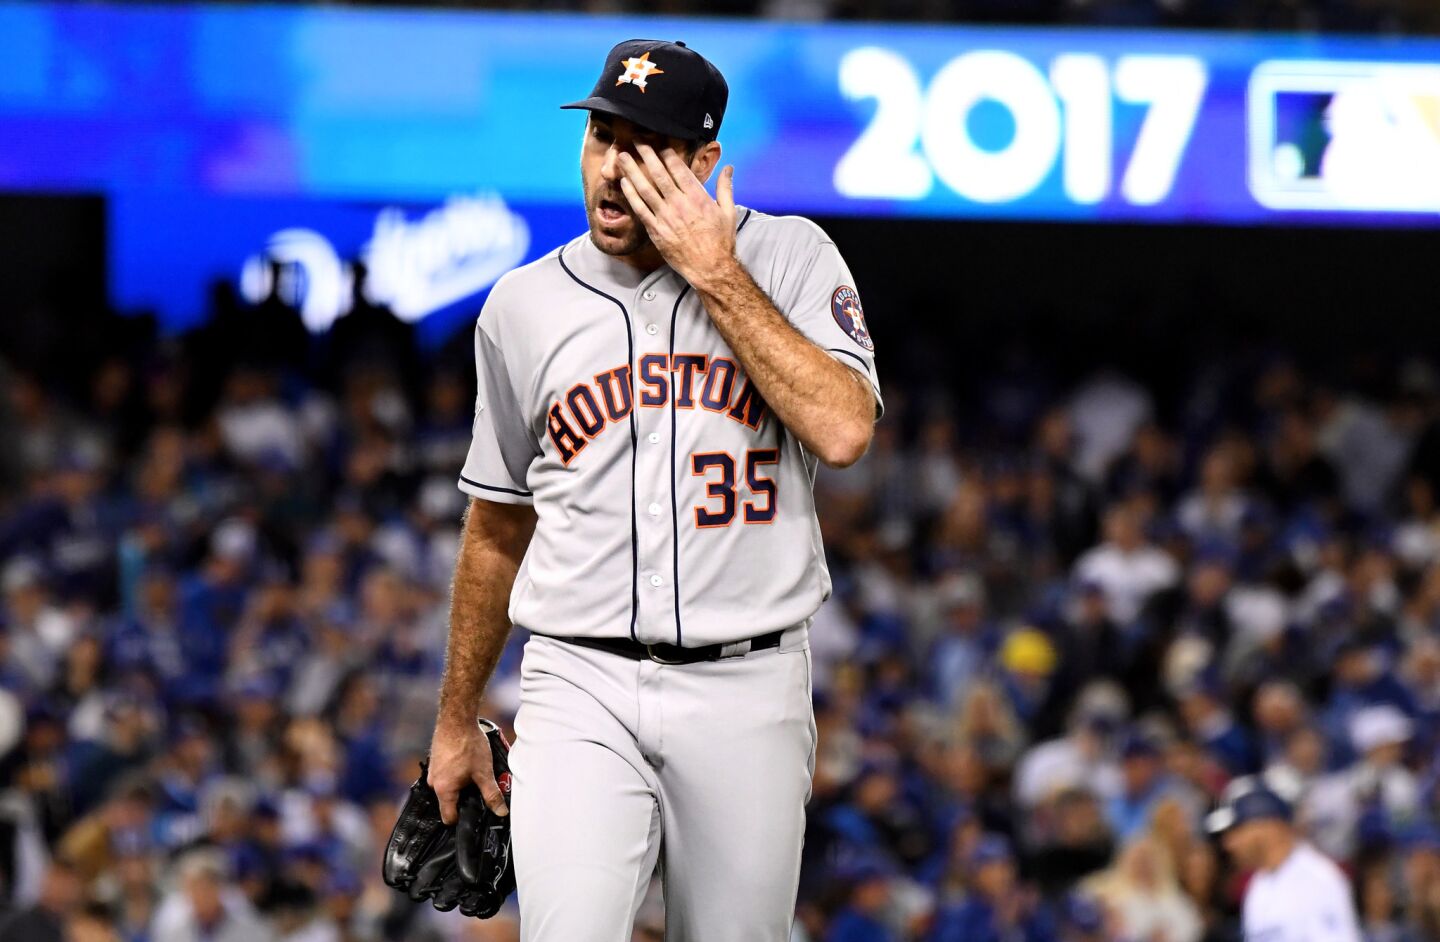 Justin Verlander wlaks back to the dugout after giving up the lead to the Dodgers in the sixth.